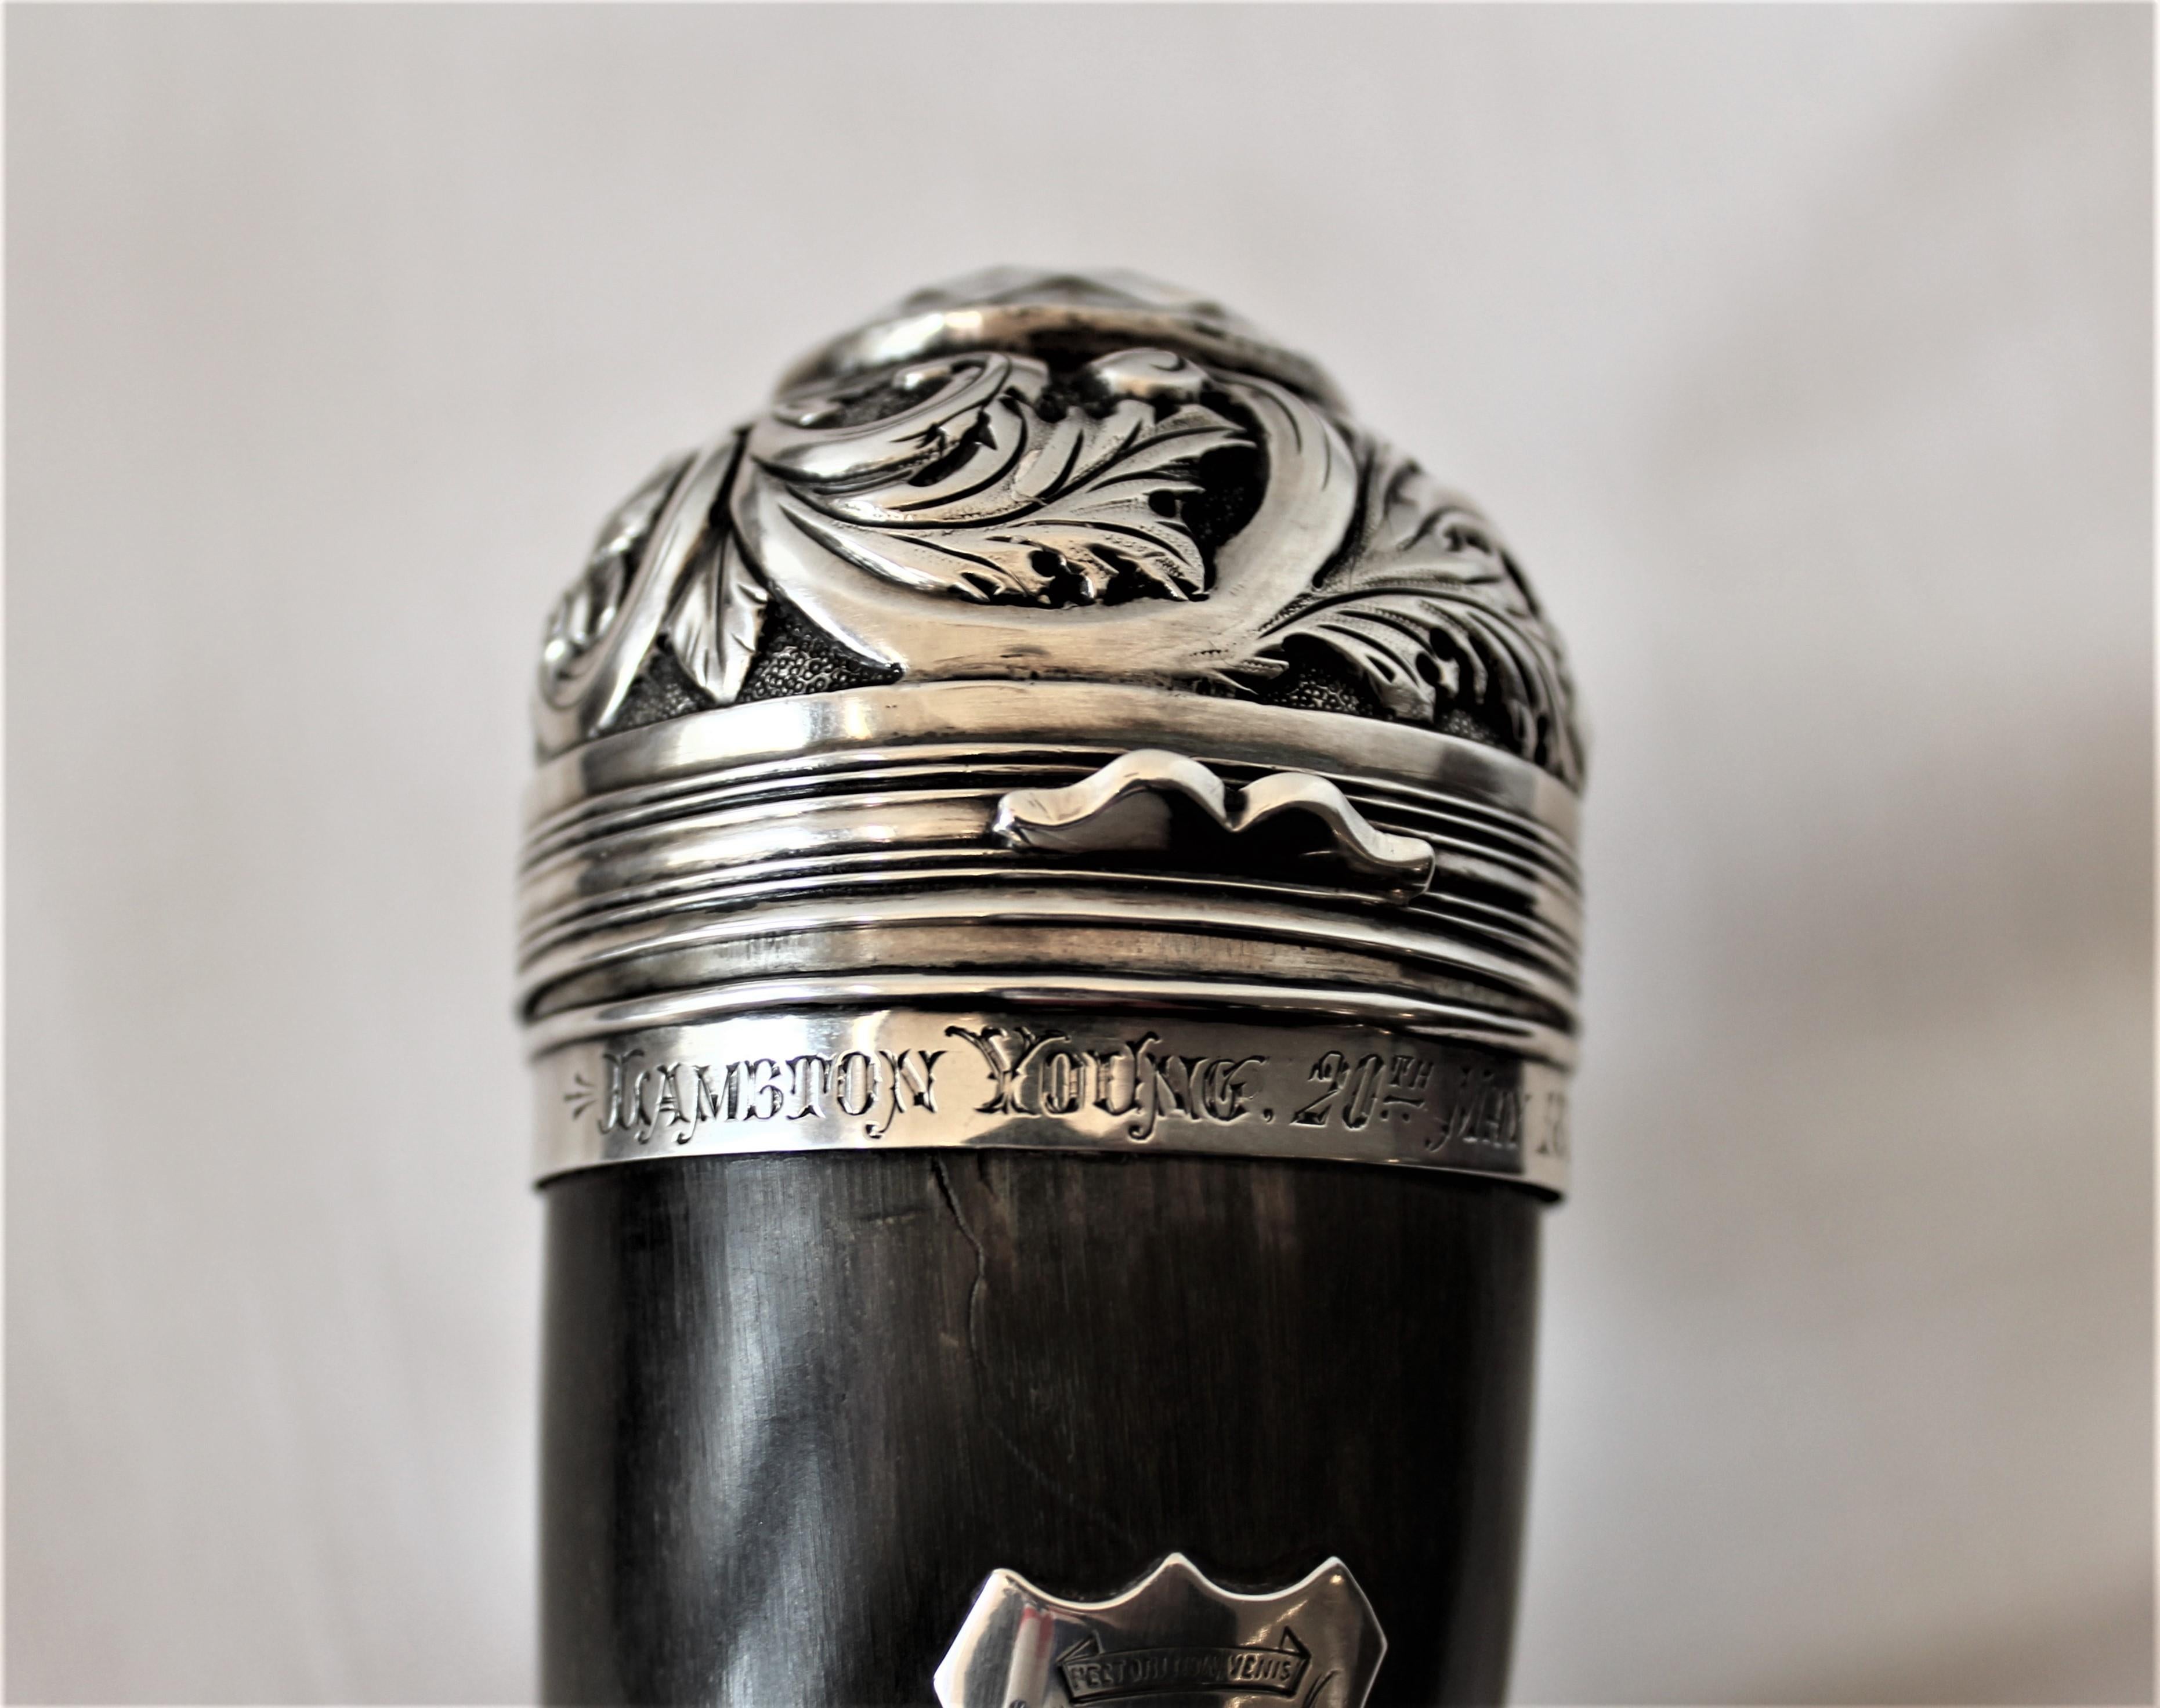 Engraved Scottish Polished Horn and Sterling Silver Mounted Snuff Mull or Box